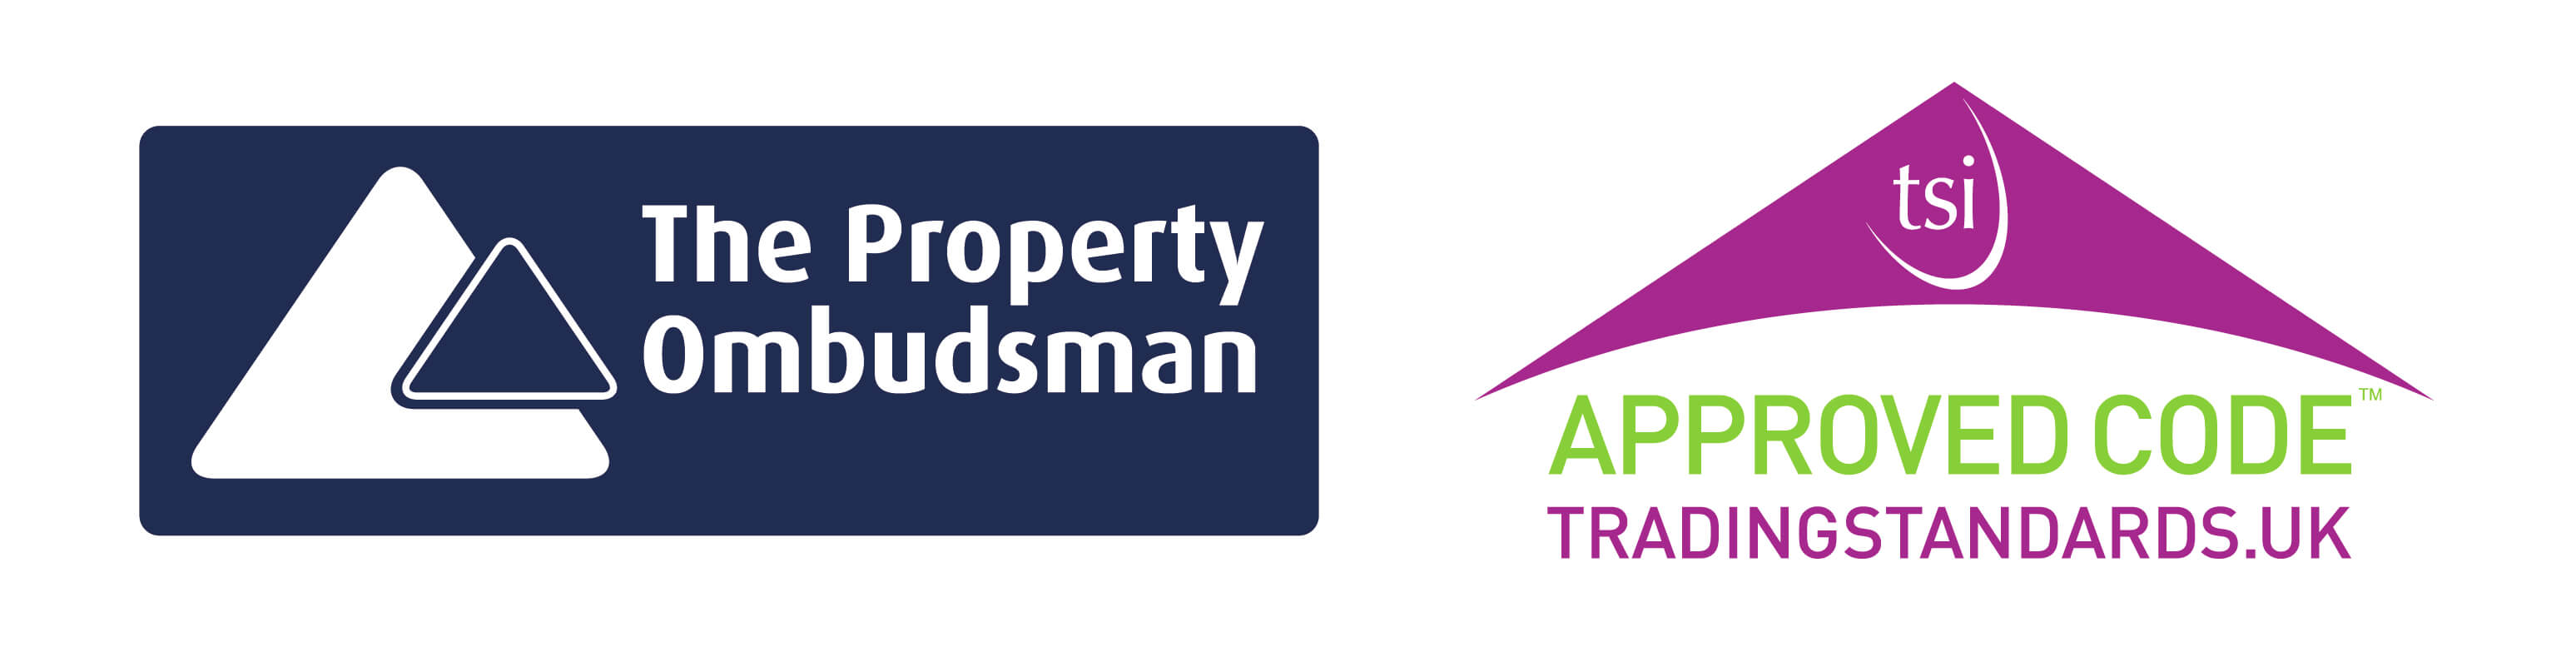 The Property Ombudsman and TSI Approved Code Trading Standards Logo